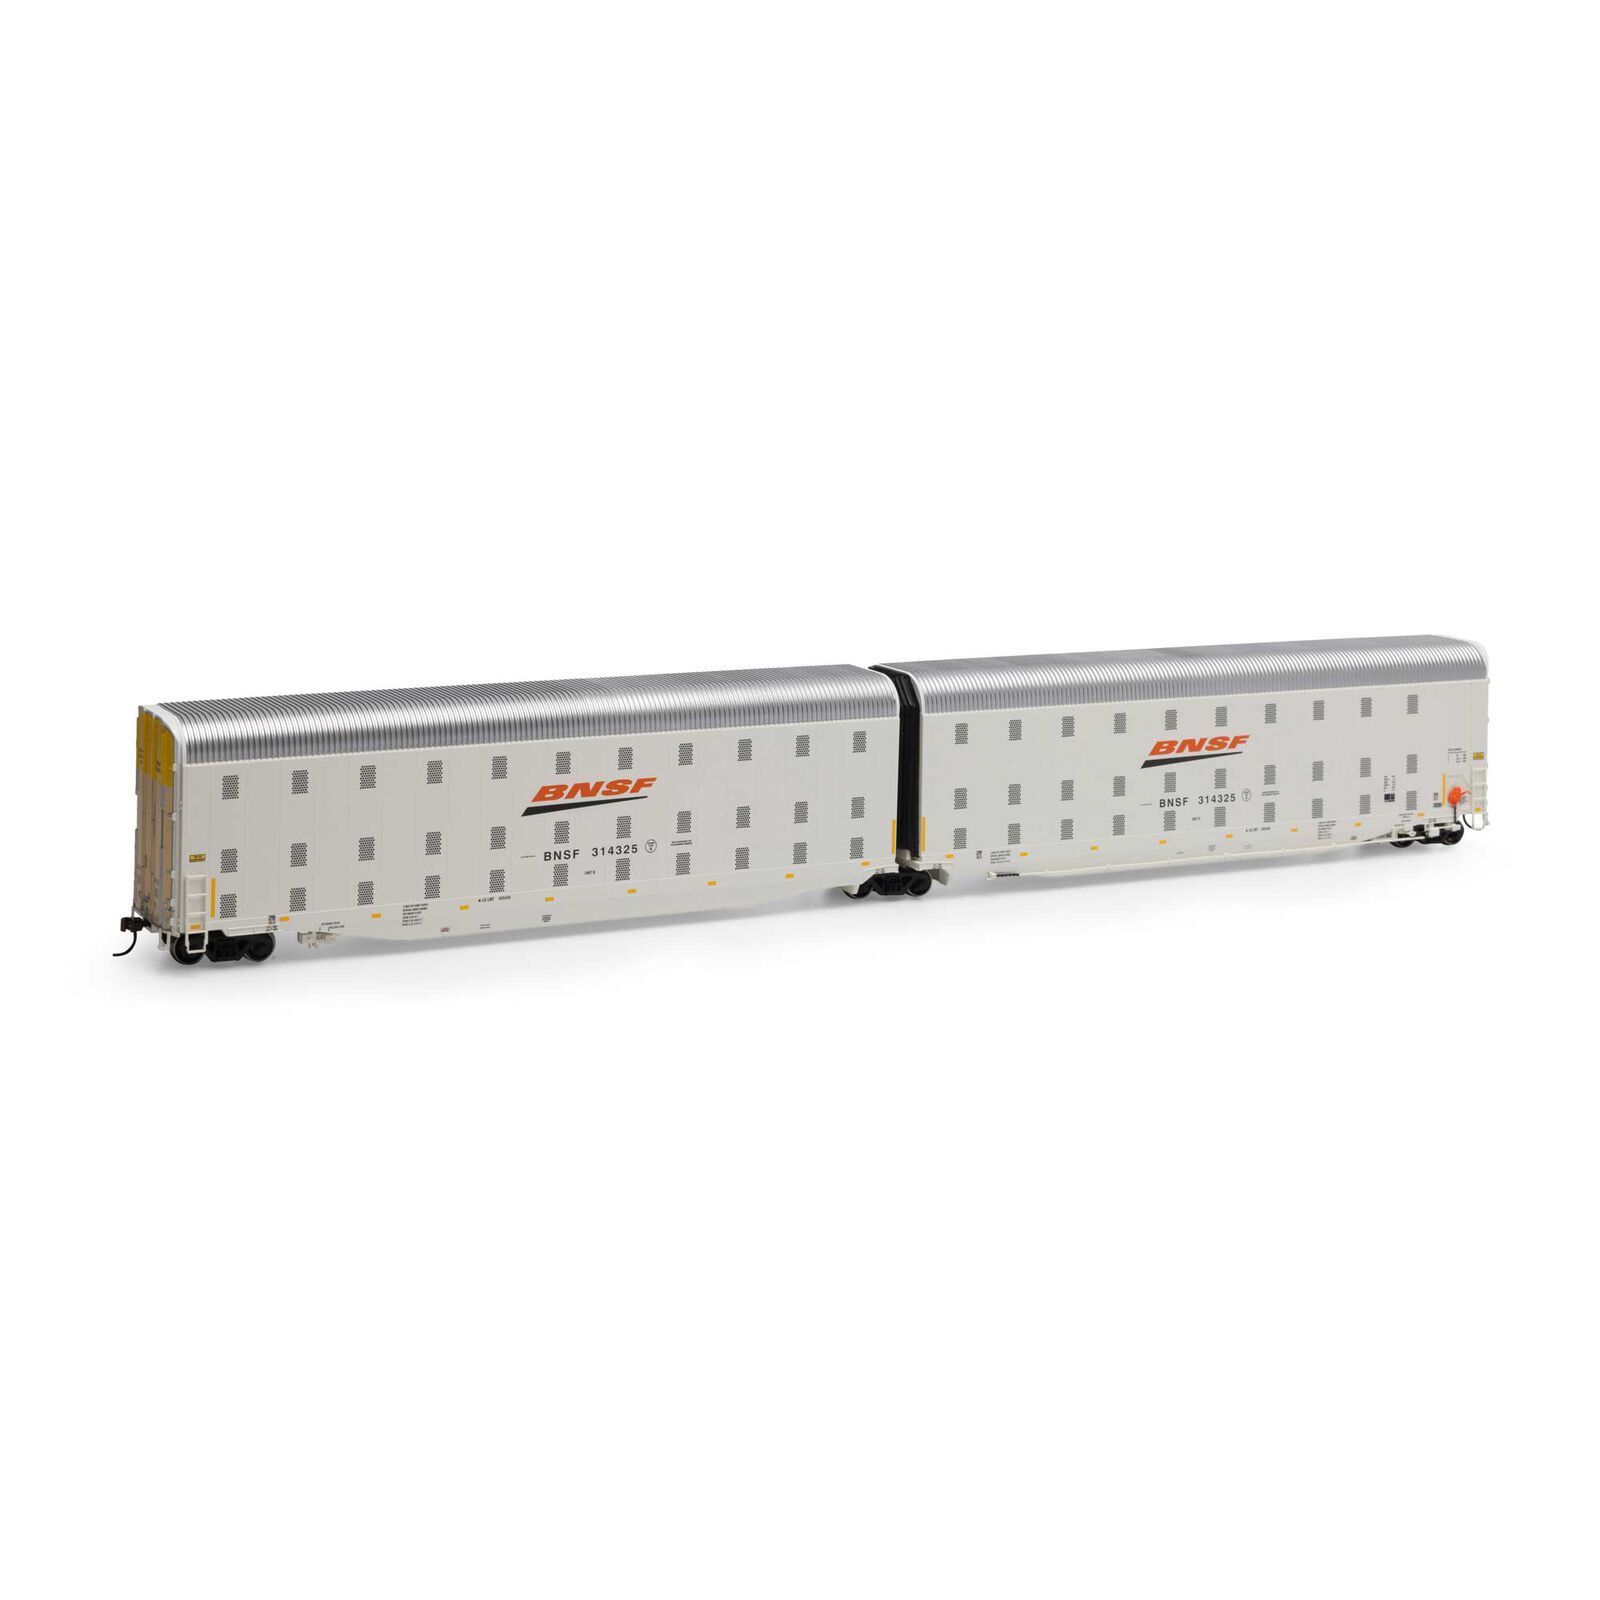 HO Auto-Max Carrier, BNSF / Wedge #314325